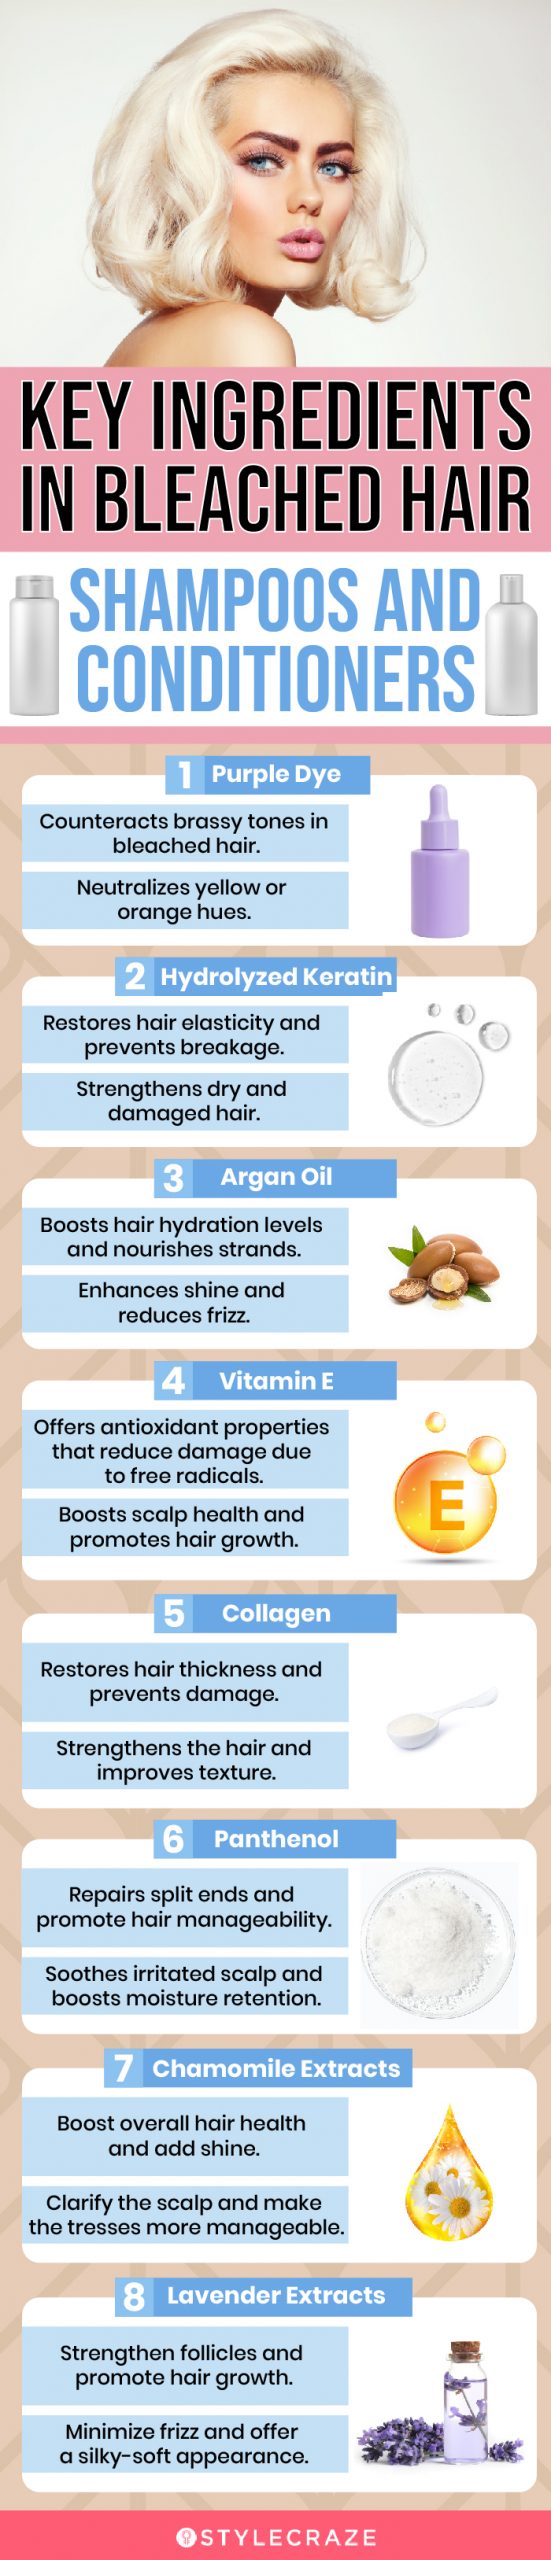 Key Ingredients In Bleached Hair Shampoos And Conditioners (infographic)